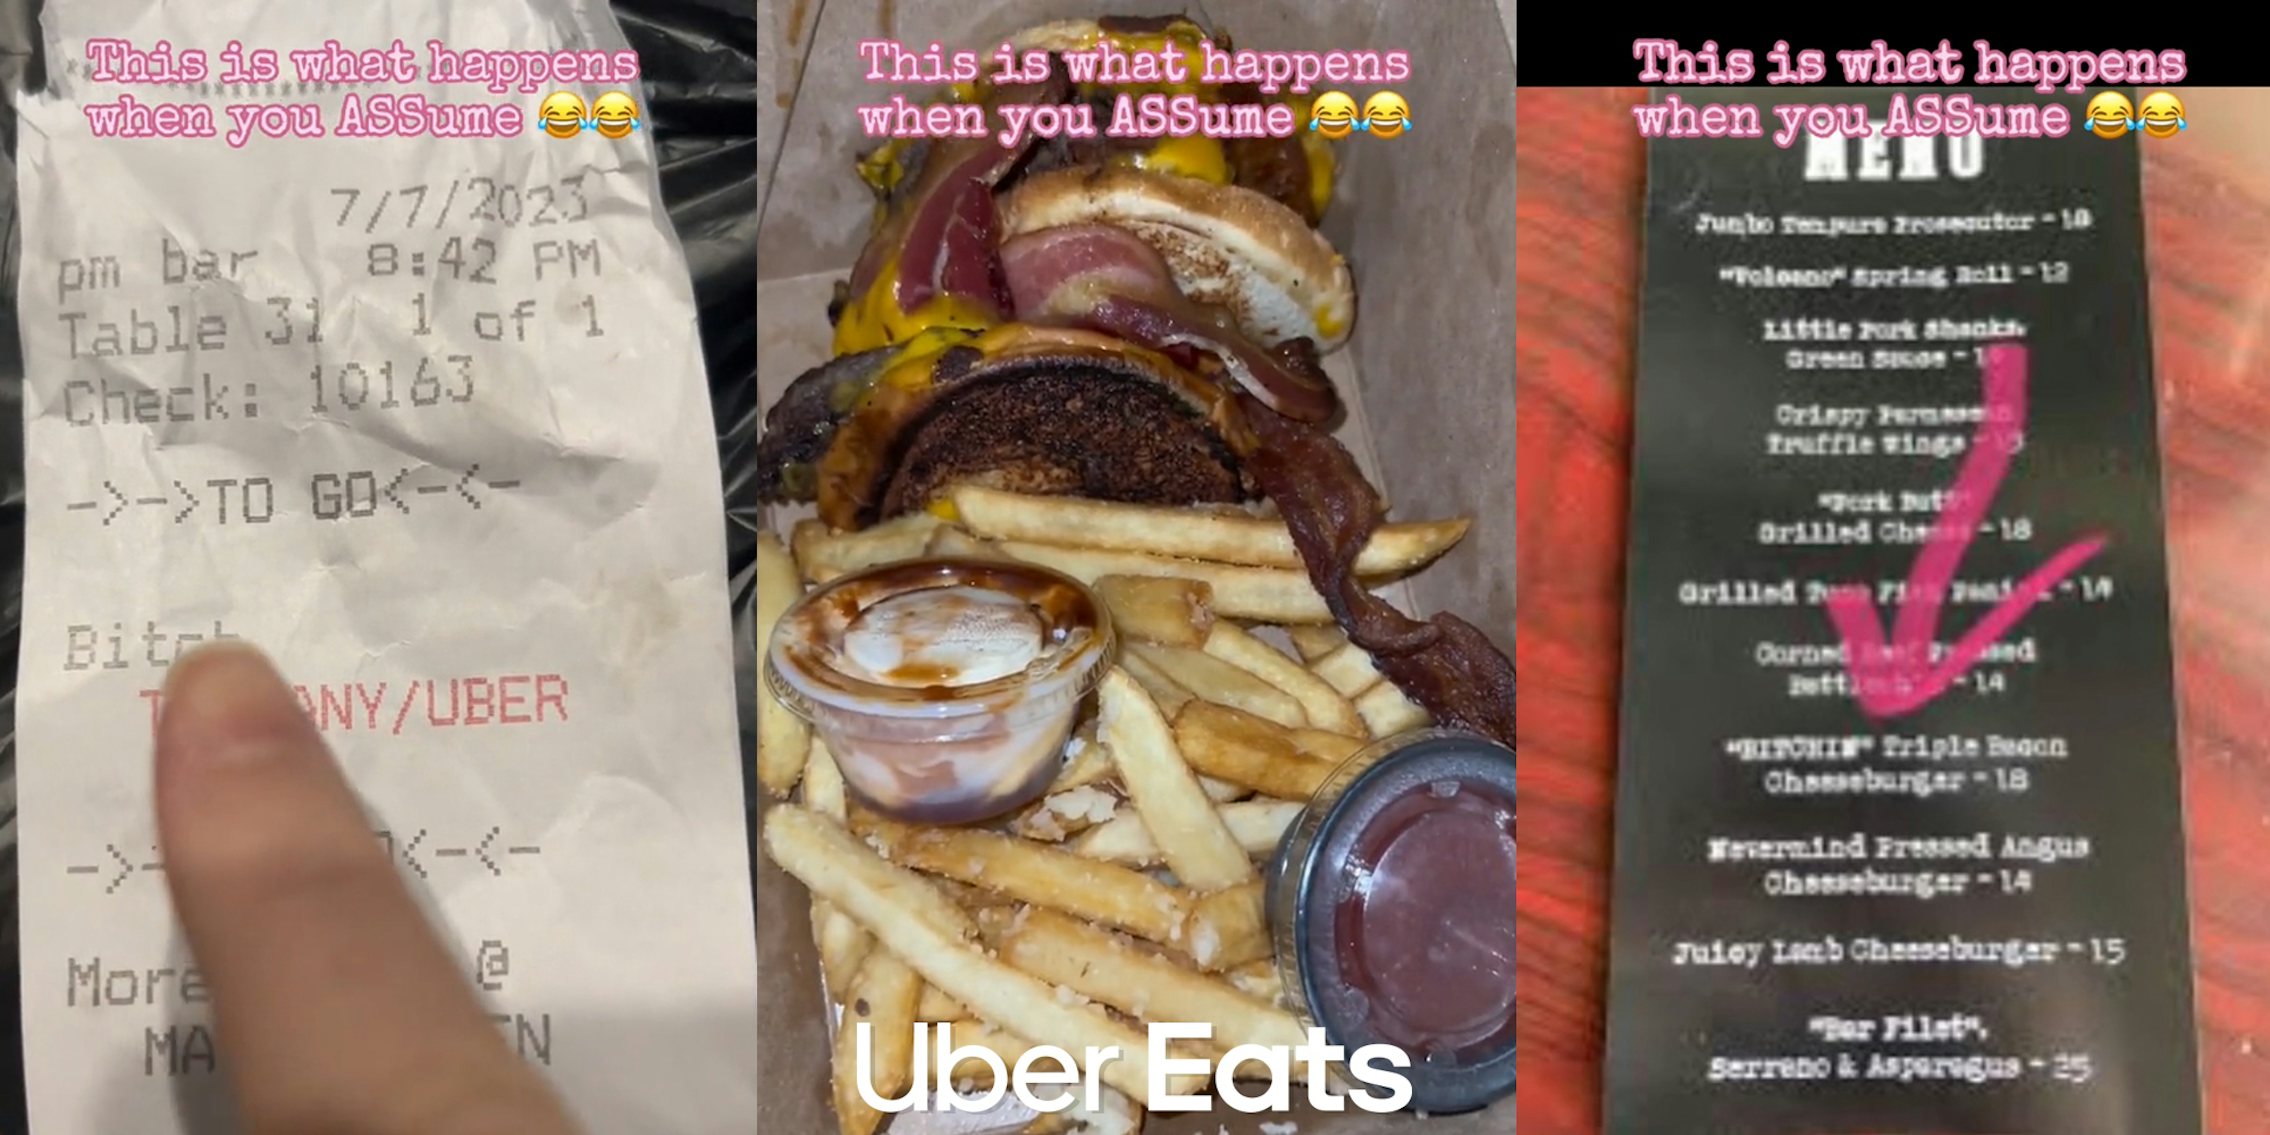 receipt with caption 'This is what happens when you ASSume' (l) burger meal with Uber Eats logo at bottom with caption 'This is what happens when you ASSume' (c) menu on table with caption 'This is what happens when you ASSume' (r)